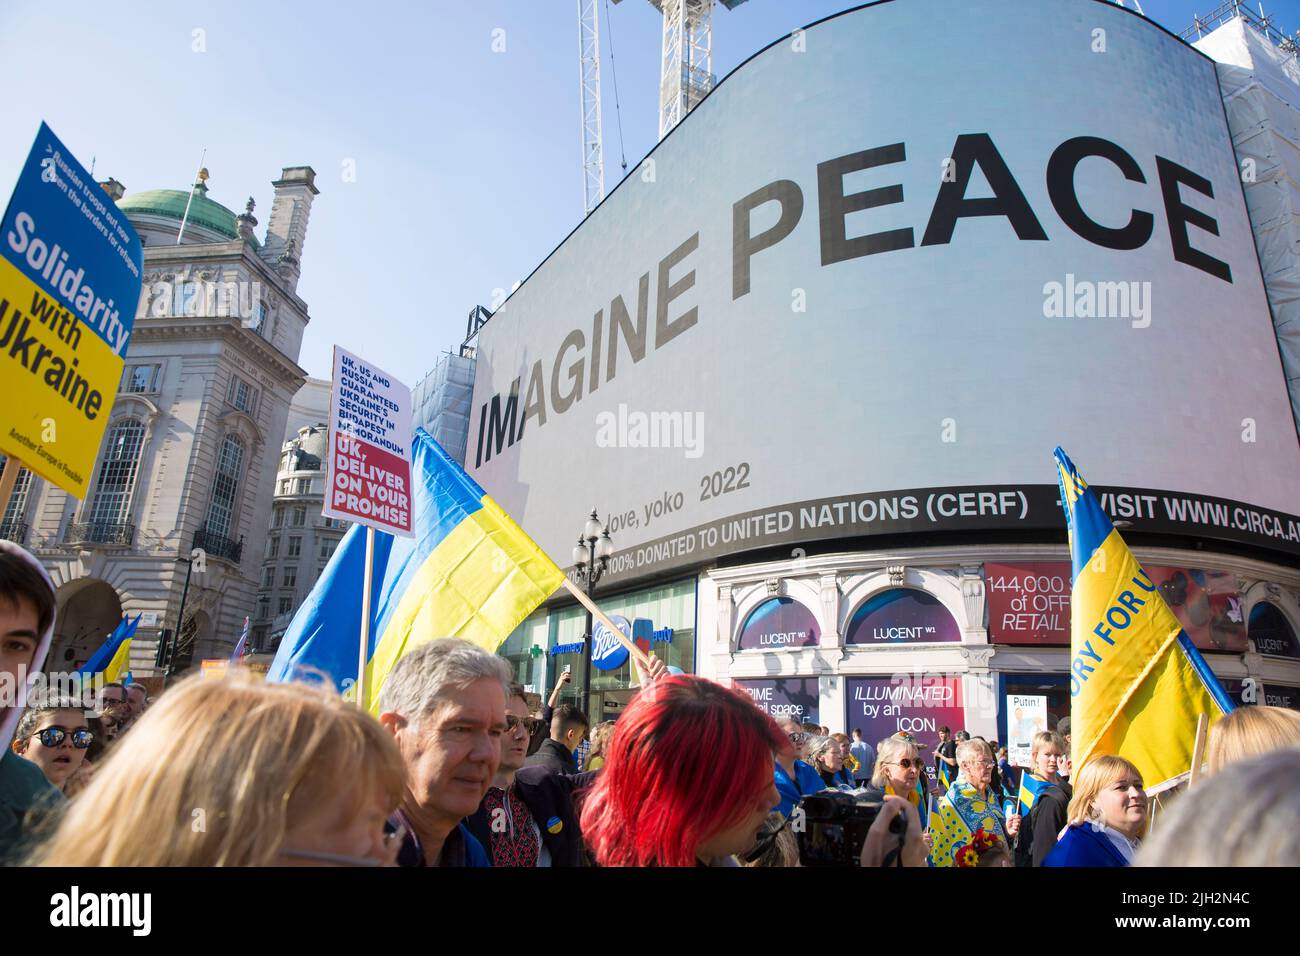 ‘IMAGINE PEACE’, a message by Yoko Ono is displayed on the large electric board as people march during the ‘London Stands with Ukraine' march. Stock Photo